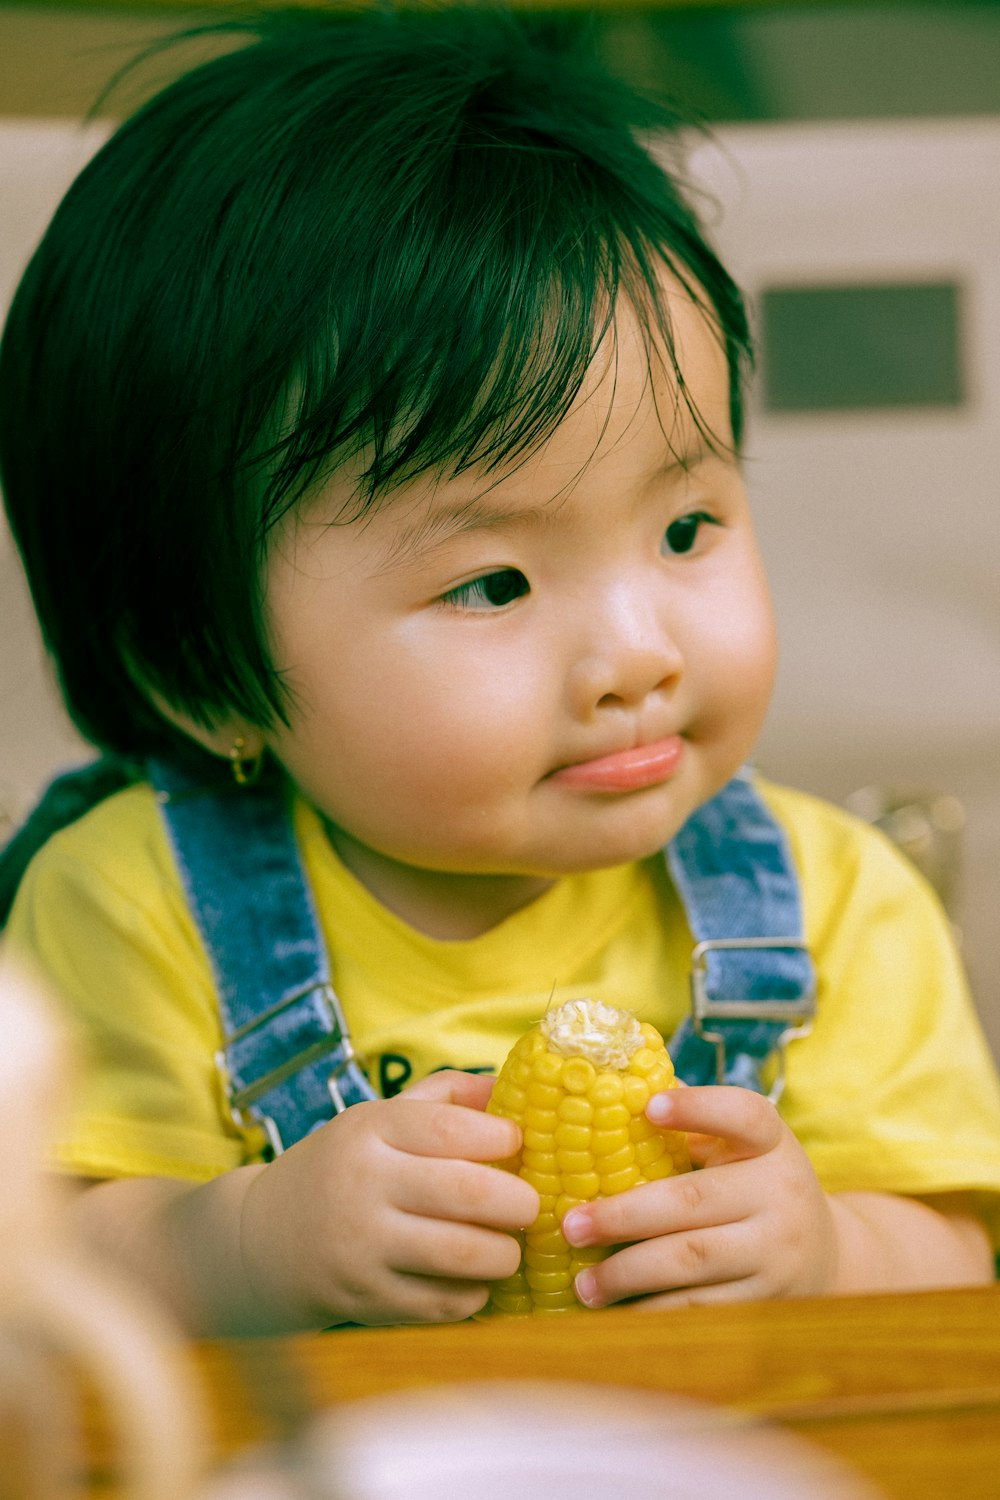 a young child sitting at a table eating a corn on the cob